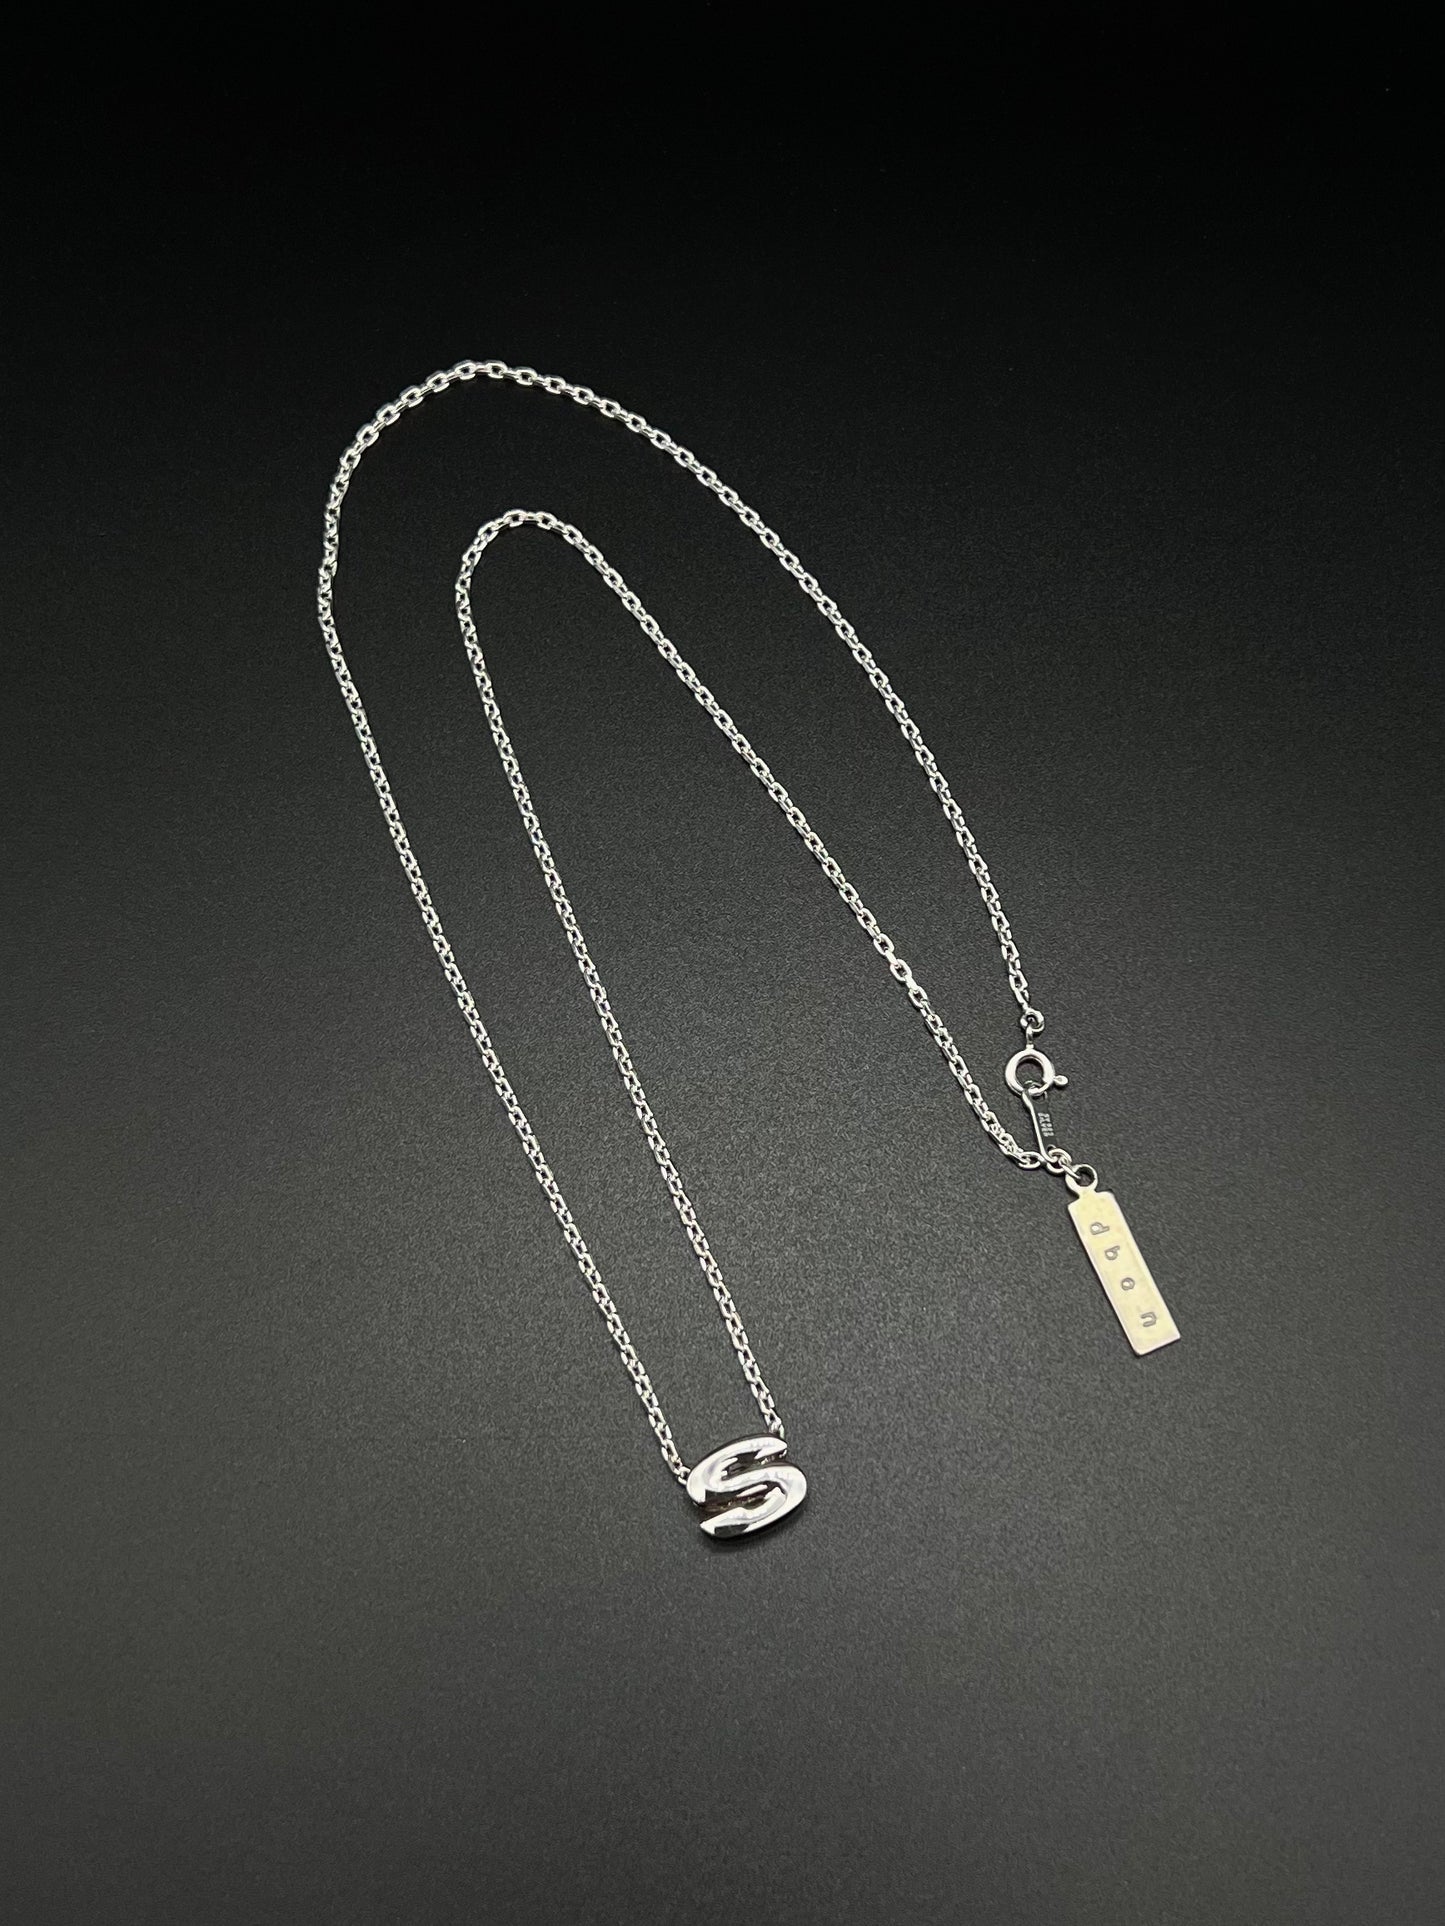 Initial "S" necklace -silver925